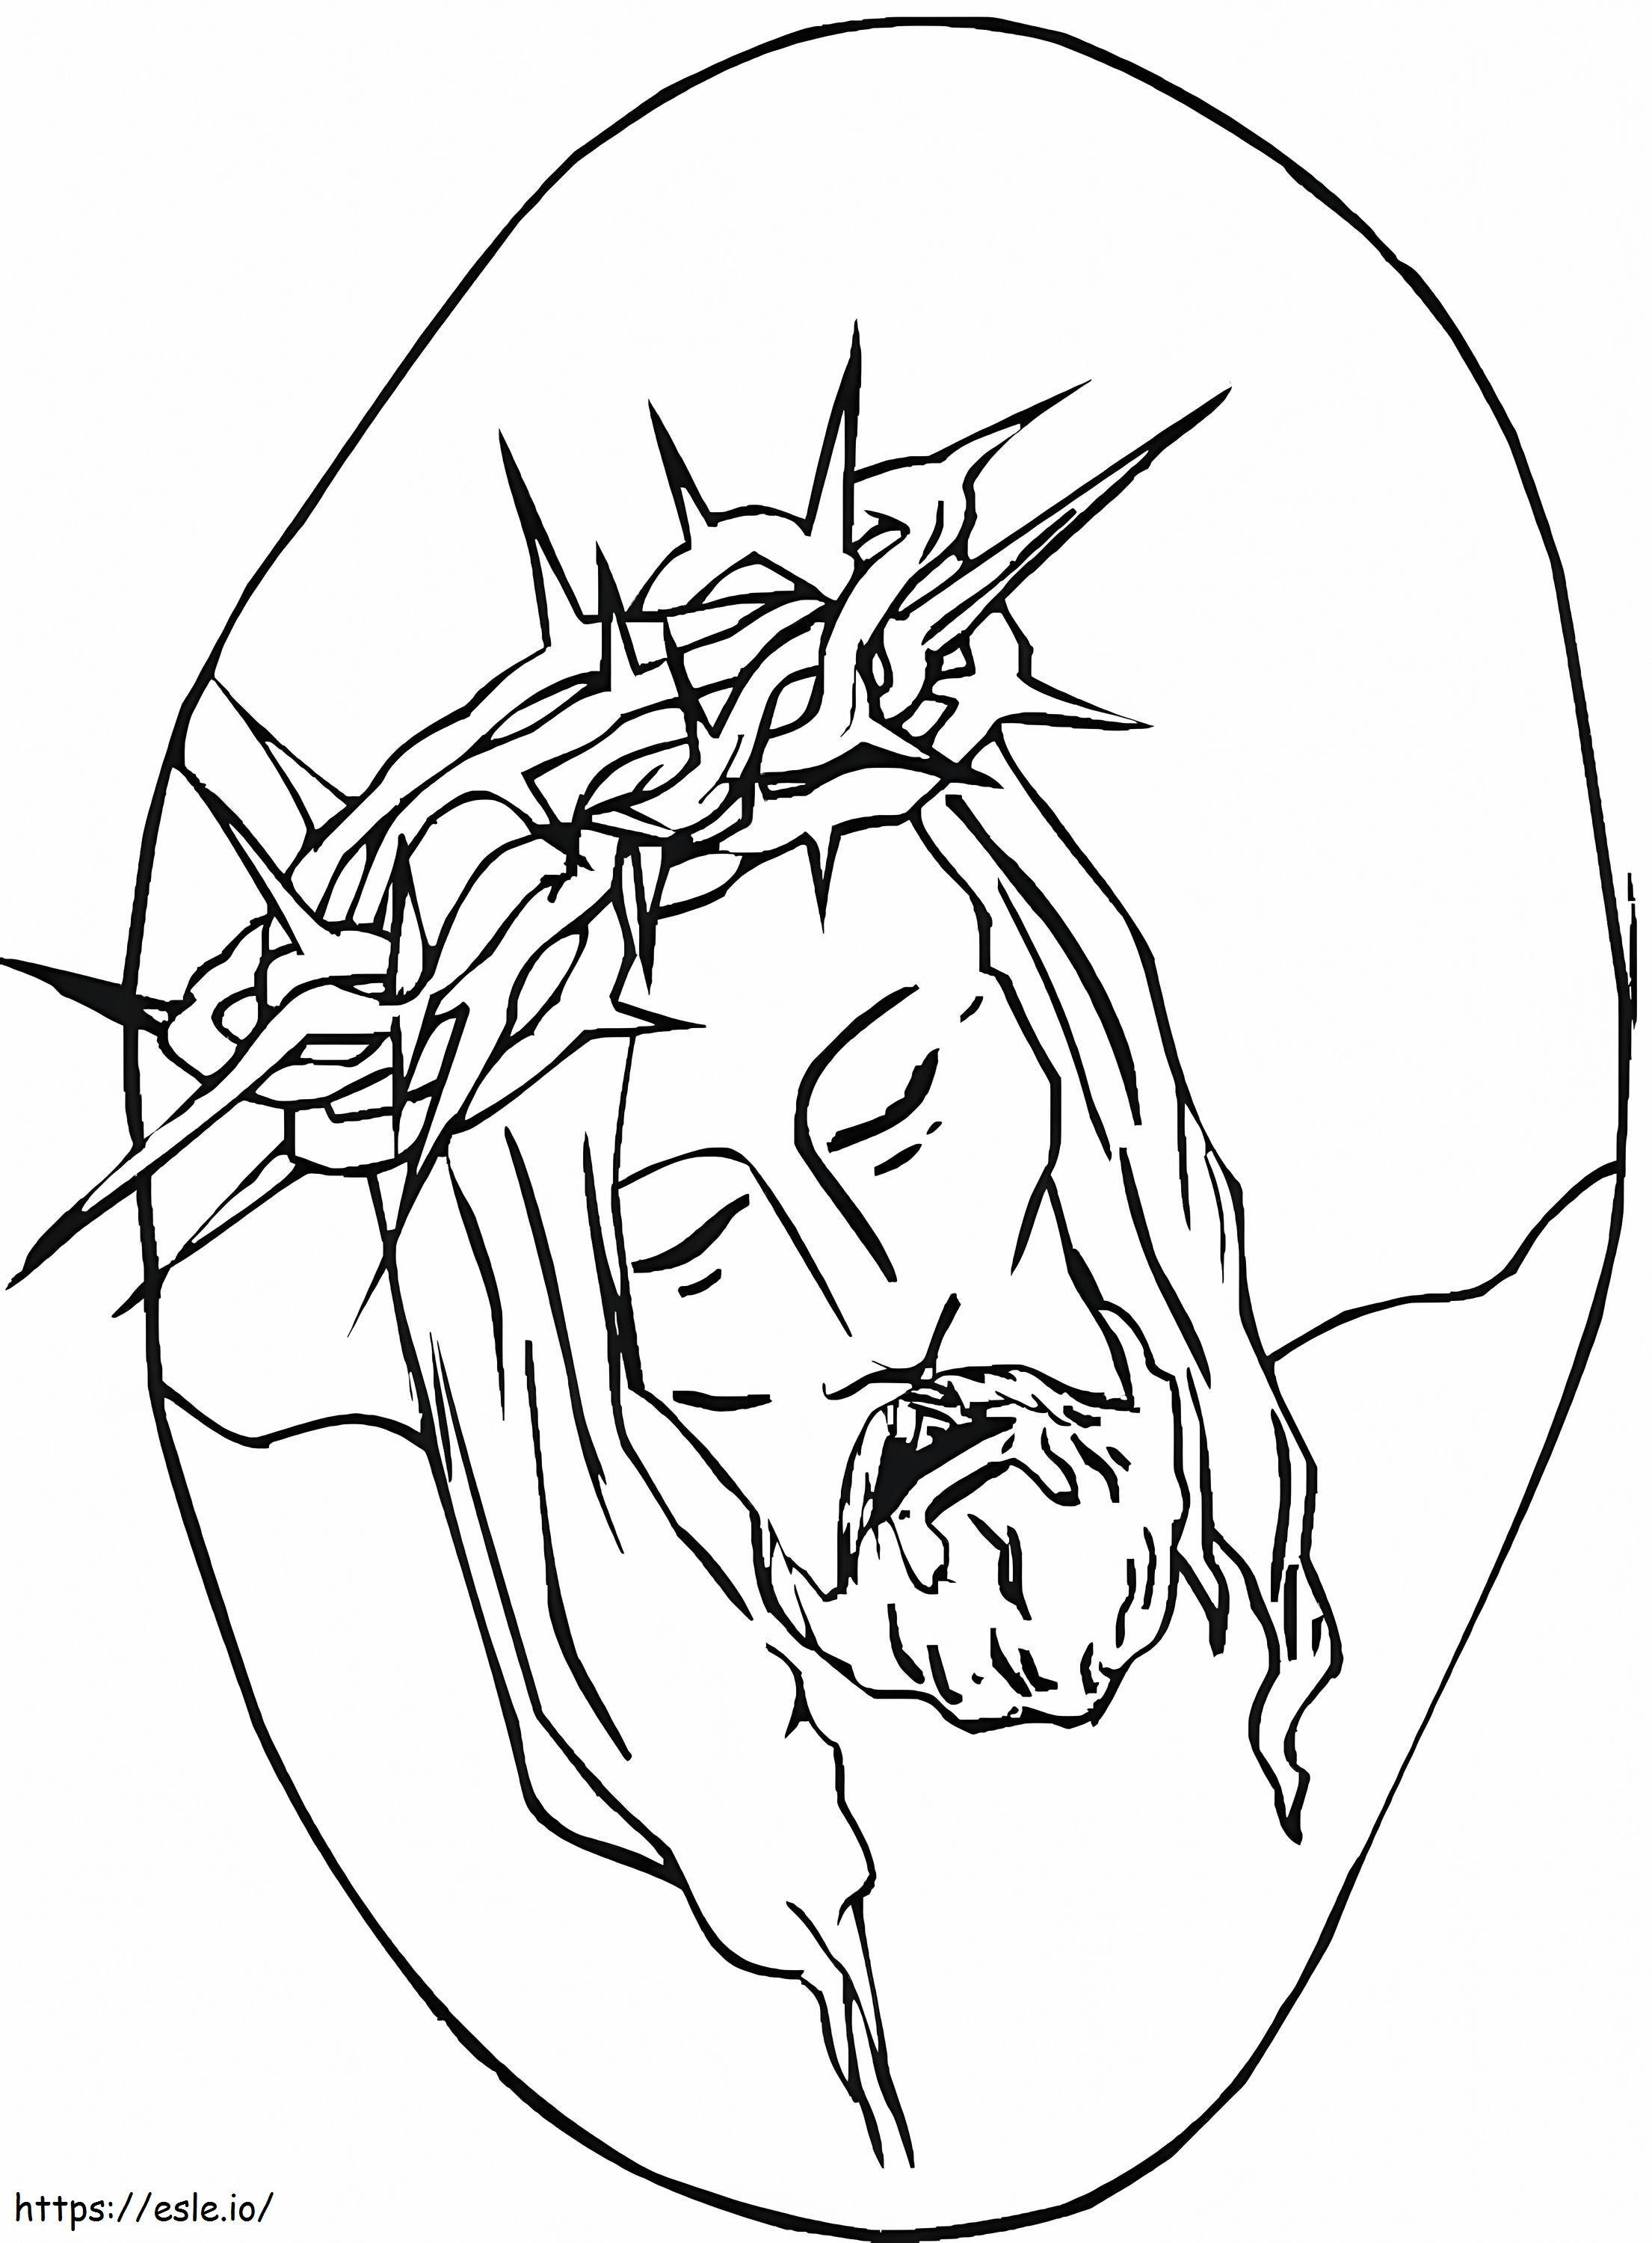 Head Of Jesus coloring page